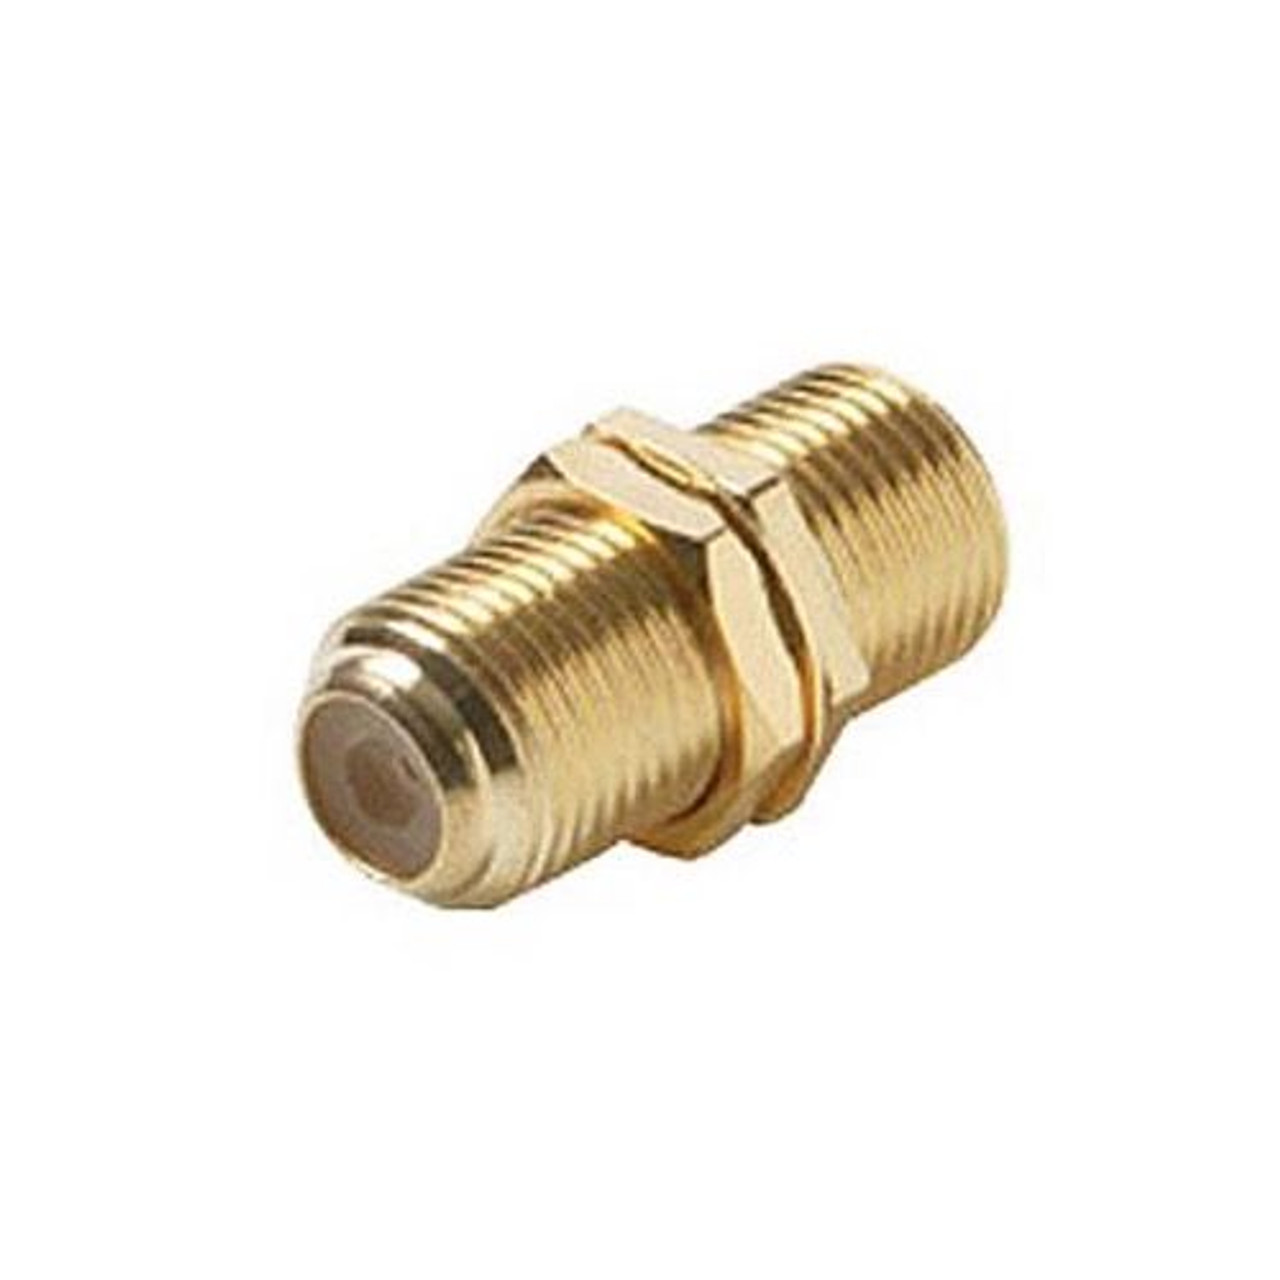 Eagle F to F Gold Type Coupler Connector Female to Female Barrel Connector Wall Plate Use Barrel 1 Pack Jack Splice Adapter Jointer Coupling Audio Video Coaxial Cable Plug Extension